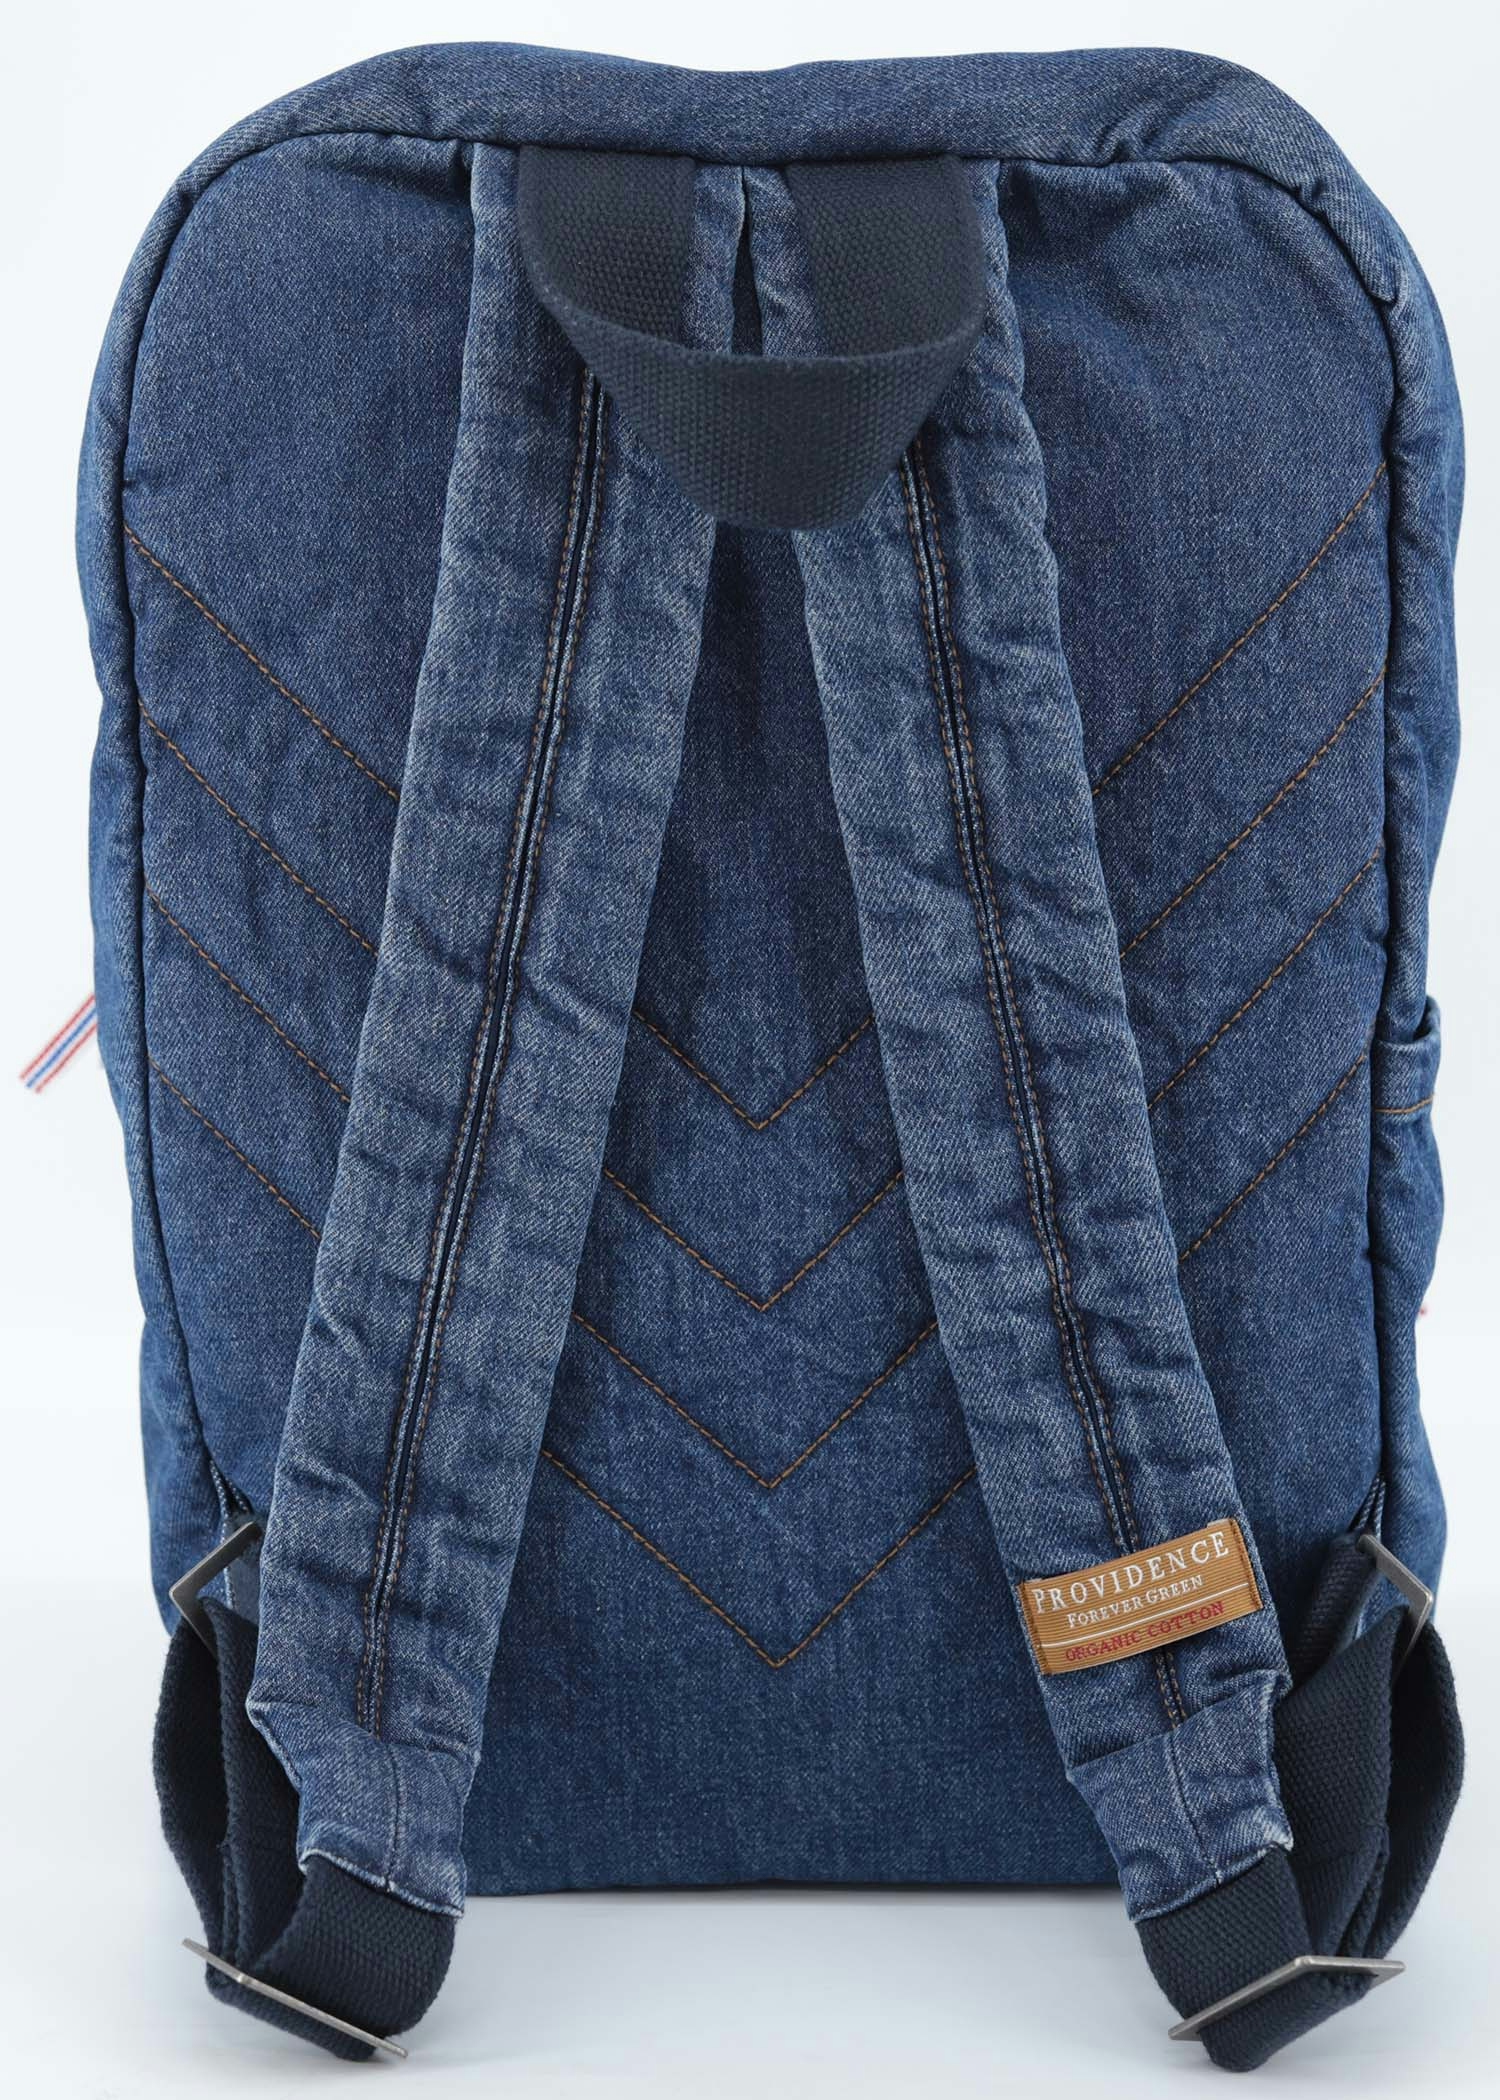 Flight Backpack back view